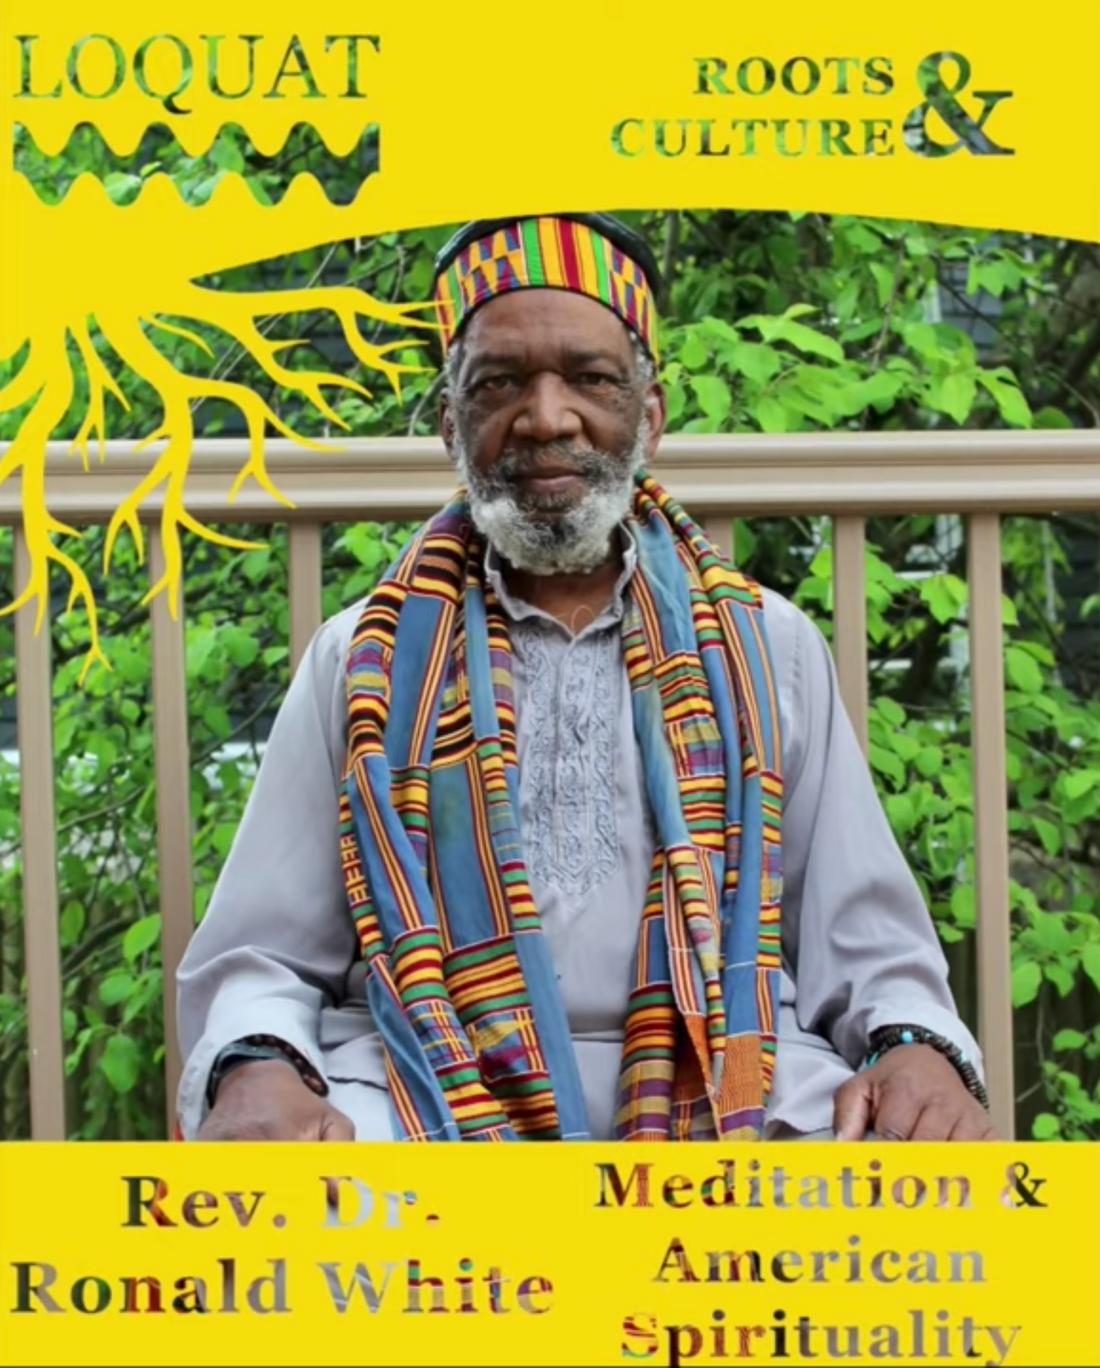 Roots& Culture: Meditation & American Spirituality with Rev. Dr. Ronald White